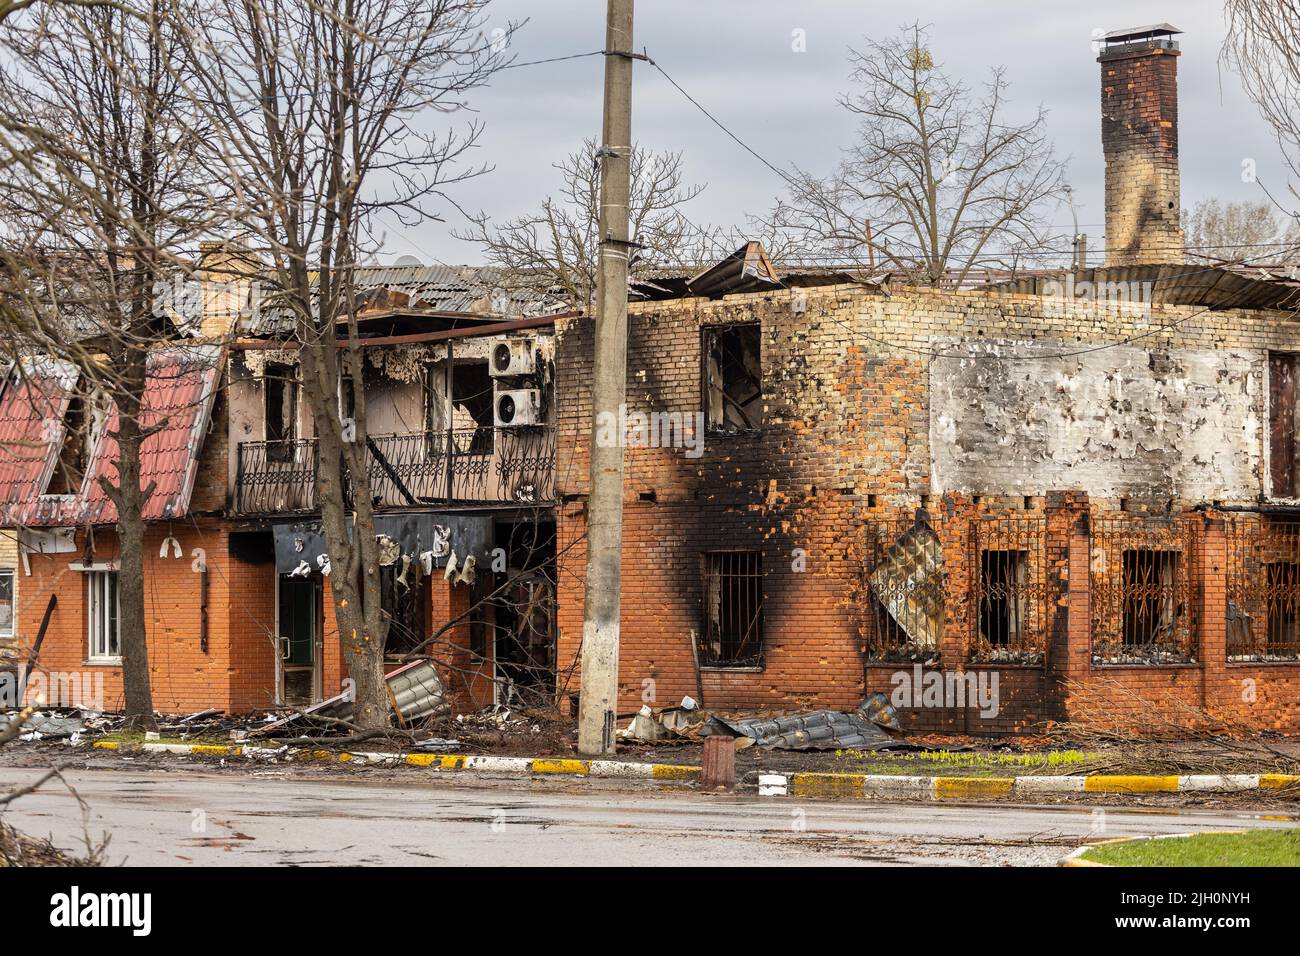 Irpin, Kyev region Ukraine - 09.04.2022: Cities of Ukraine after the Russian occupation. Destroyed buildings on the streets of Irpen. Broken, shelled Stock Photo